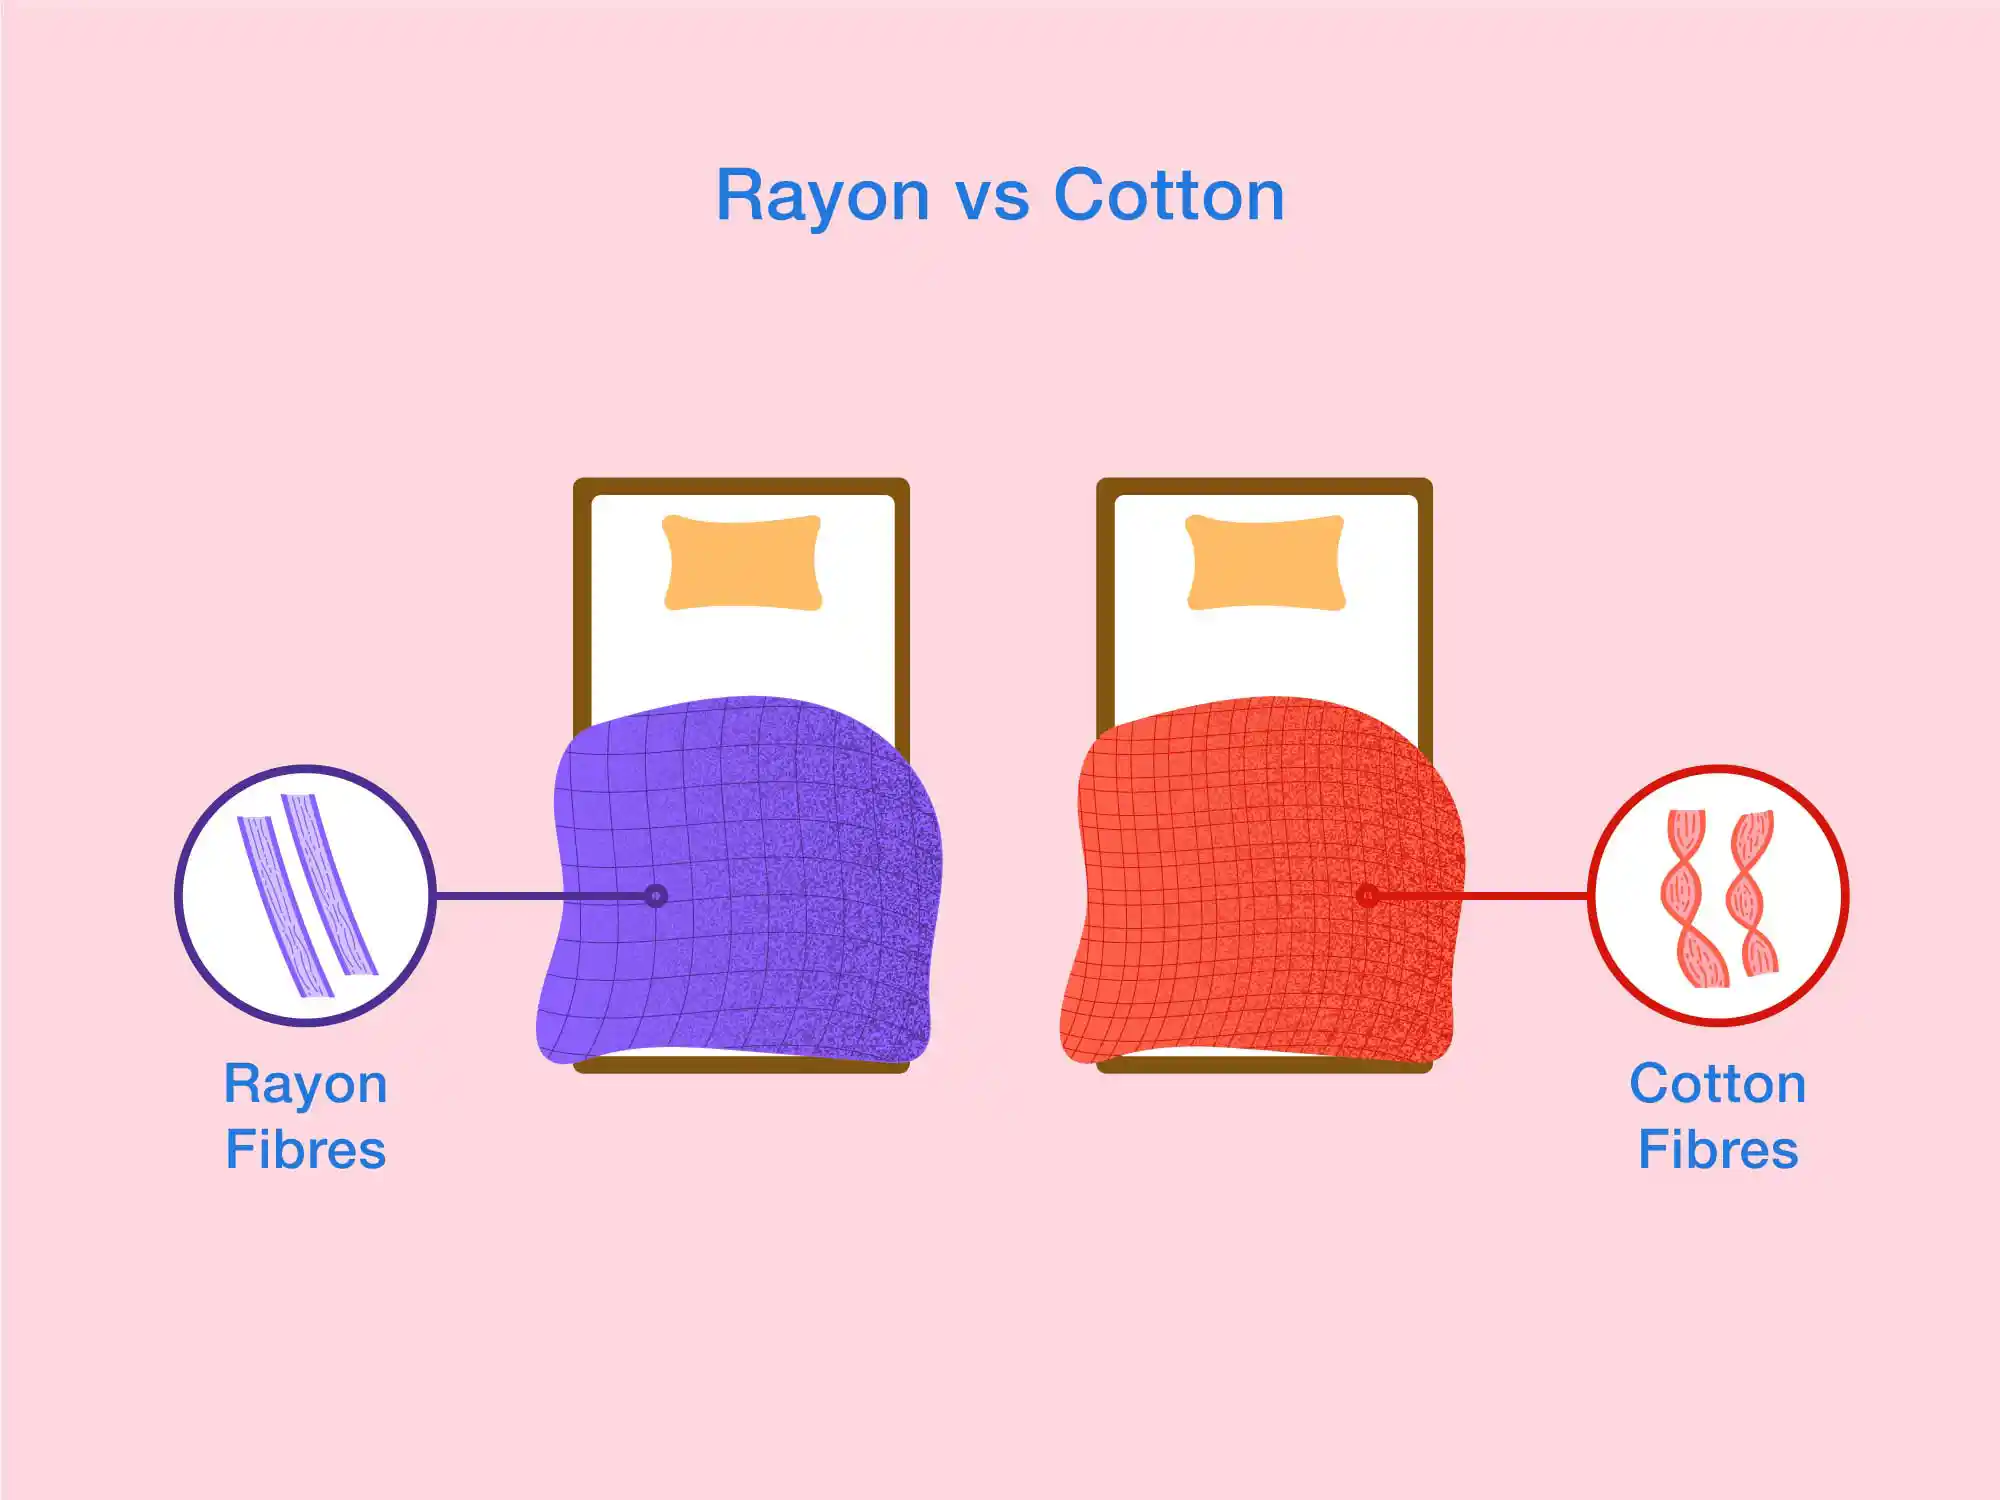 Bamboo vs Cotton Sheets: What's Better?